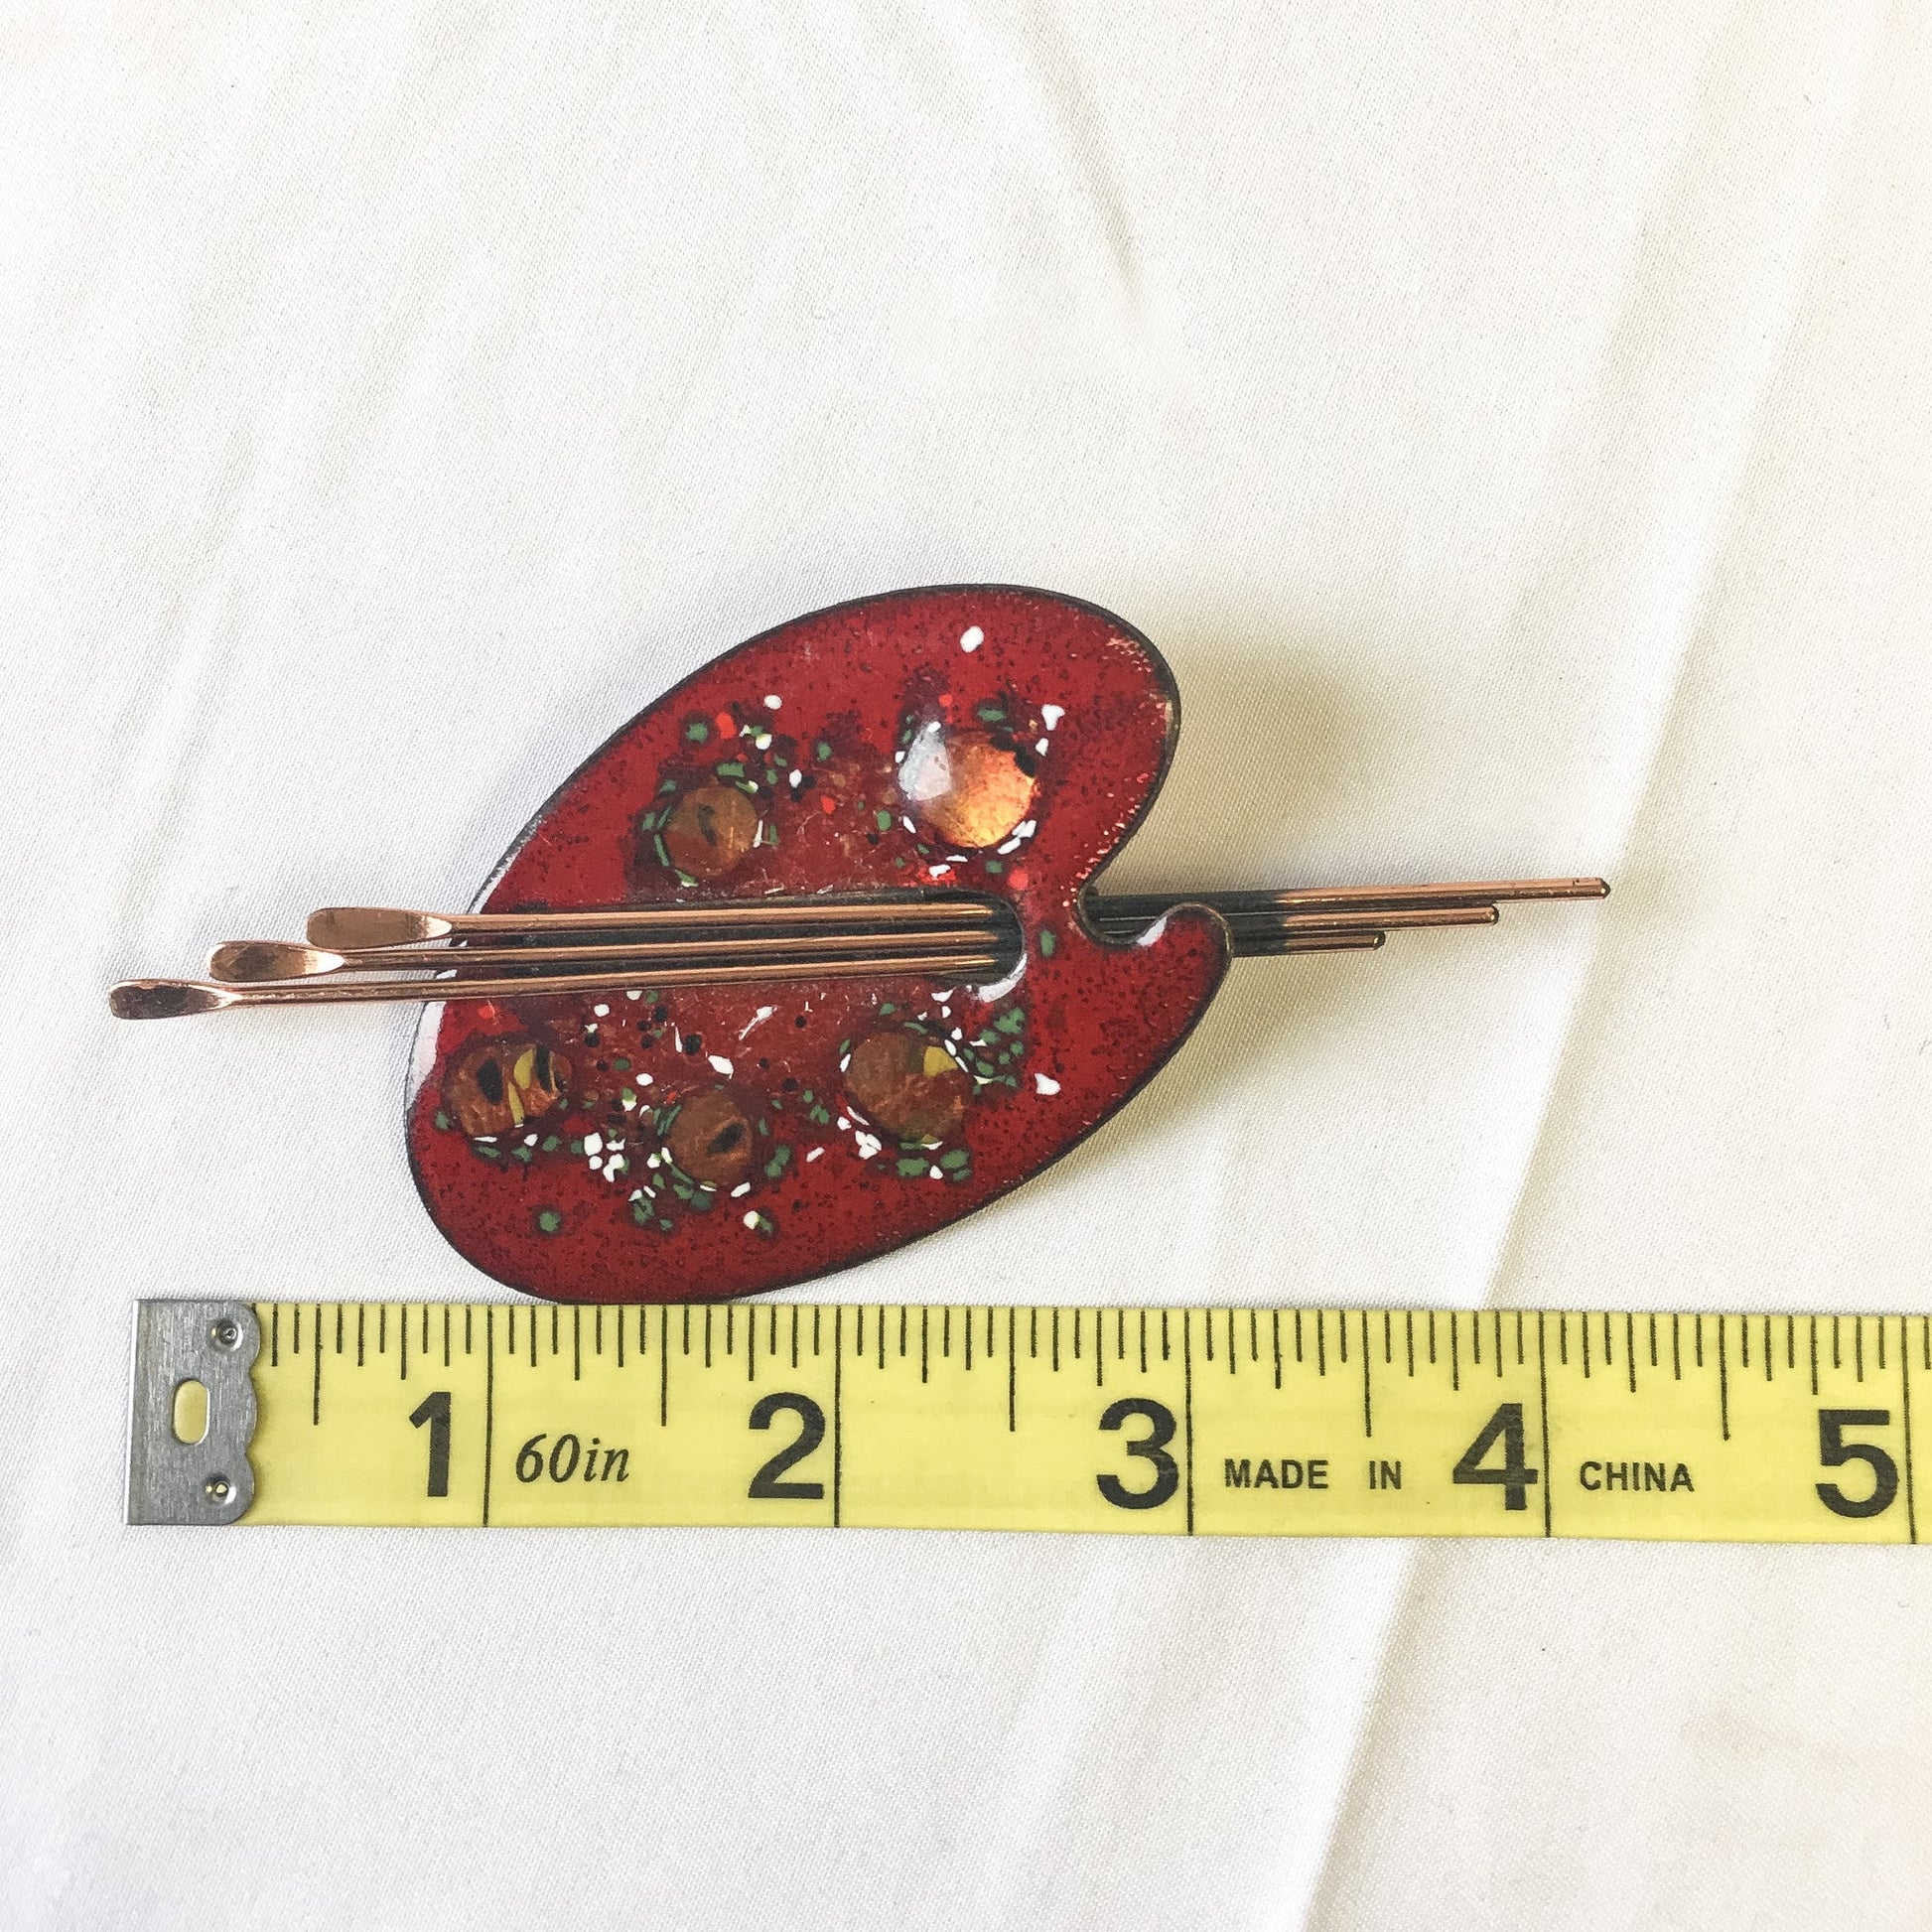 Vintage Matisse Artist Palette Pin, Copper and Resin Pin